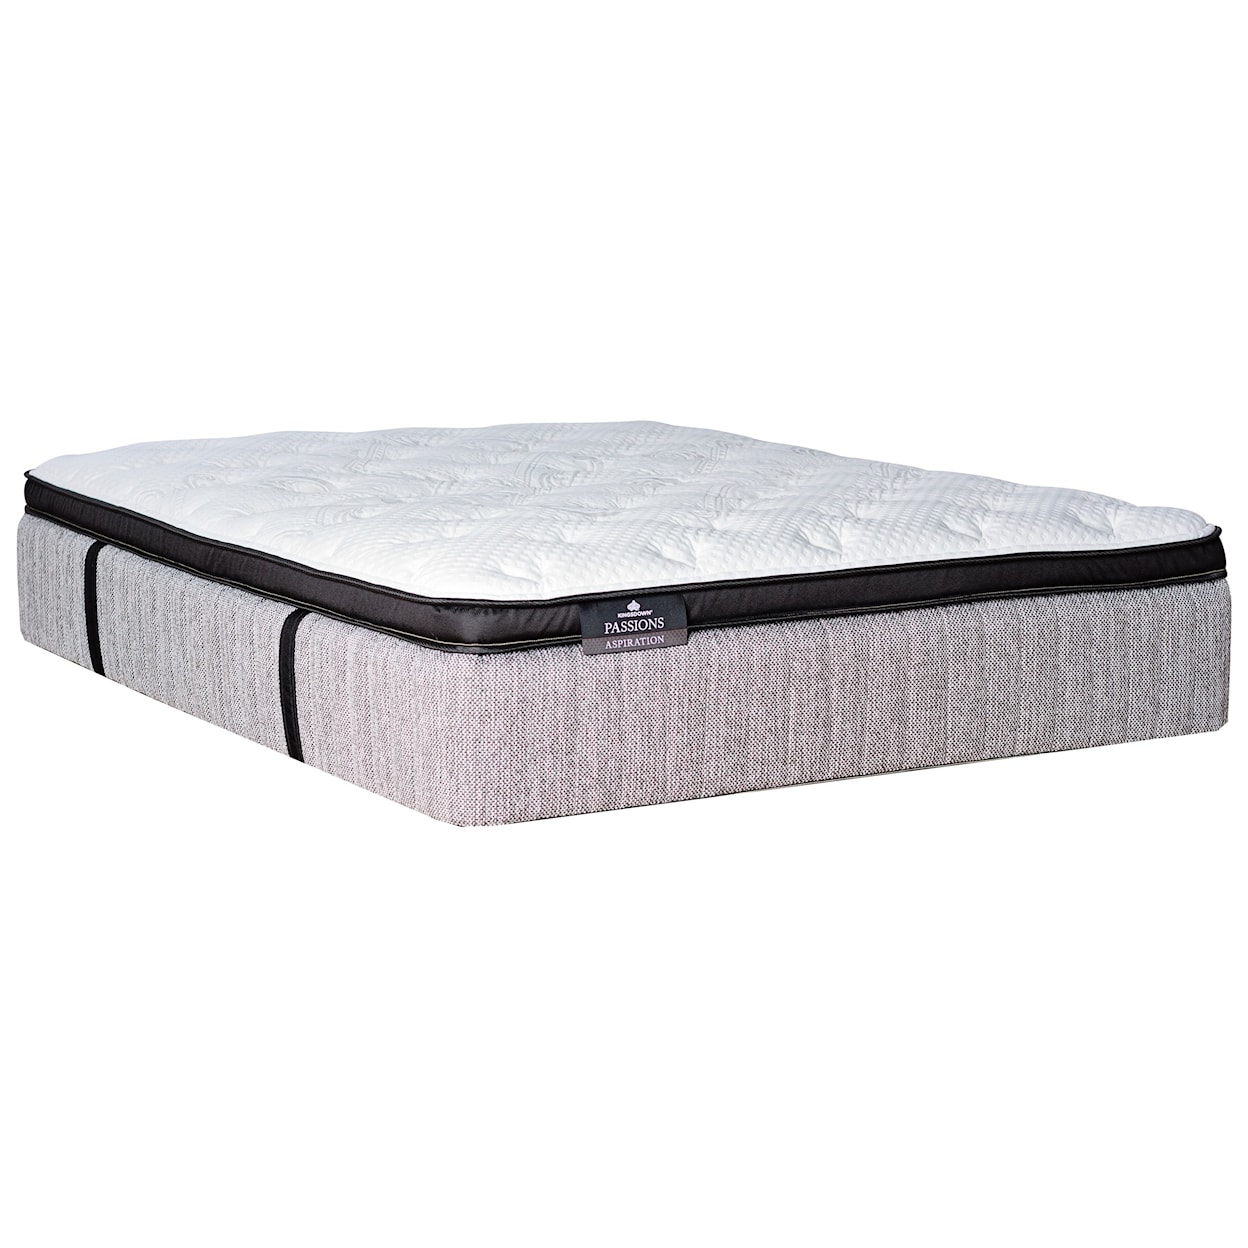 Kingsdown Passions Aspiration Pillow Top Full Pillow Top Pocketed Coil Mattress